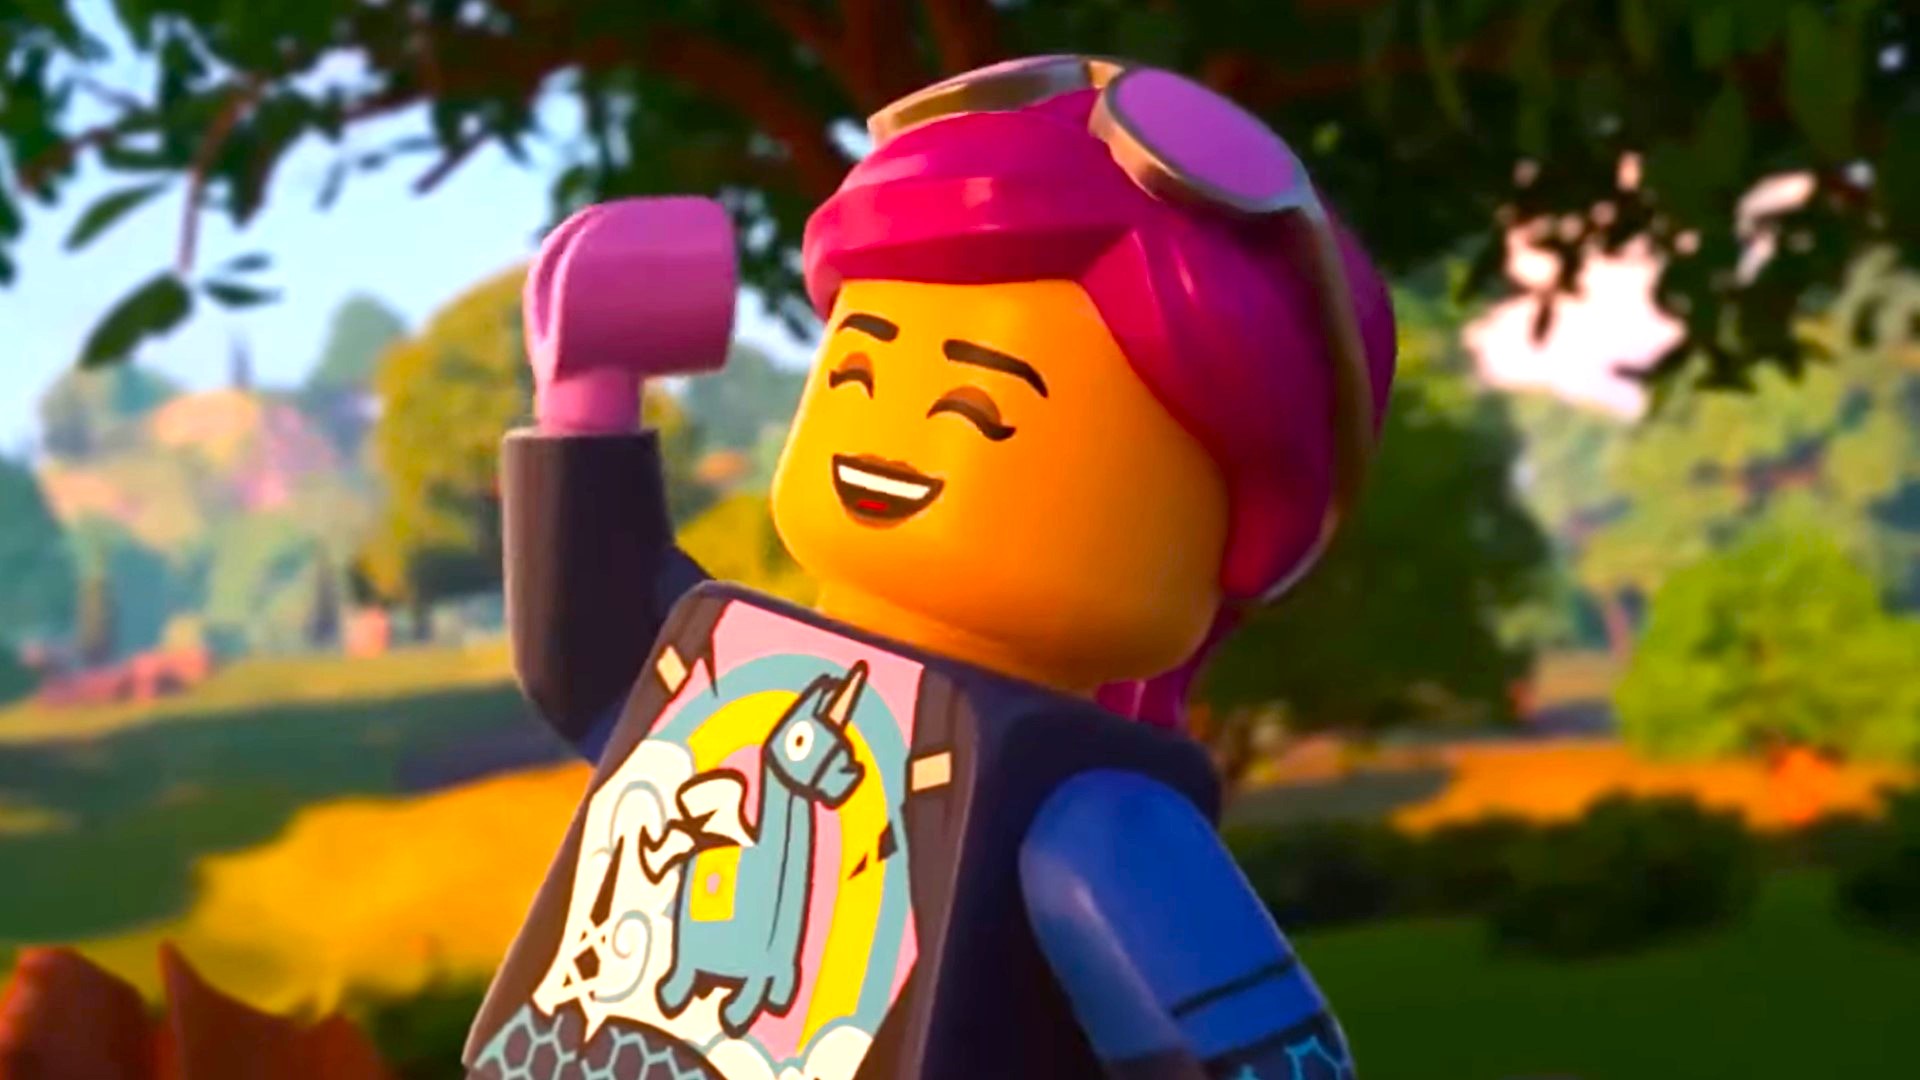 Lego Fortnite tries to be everything kids like, all at once